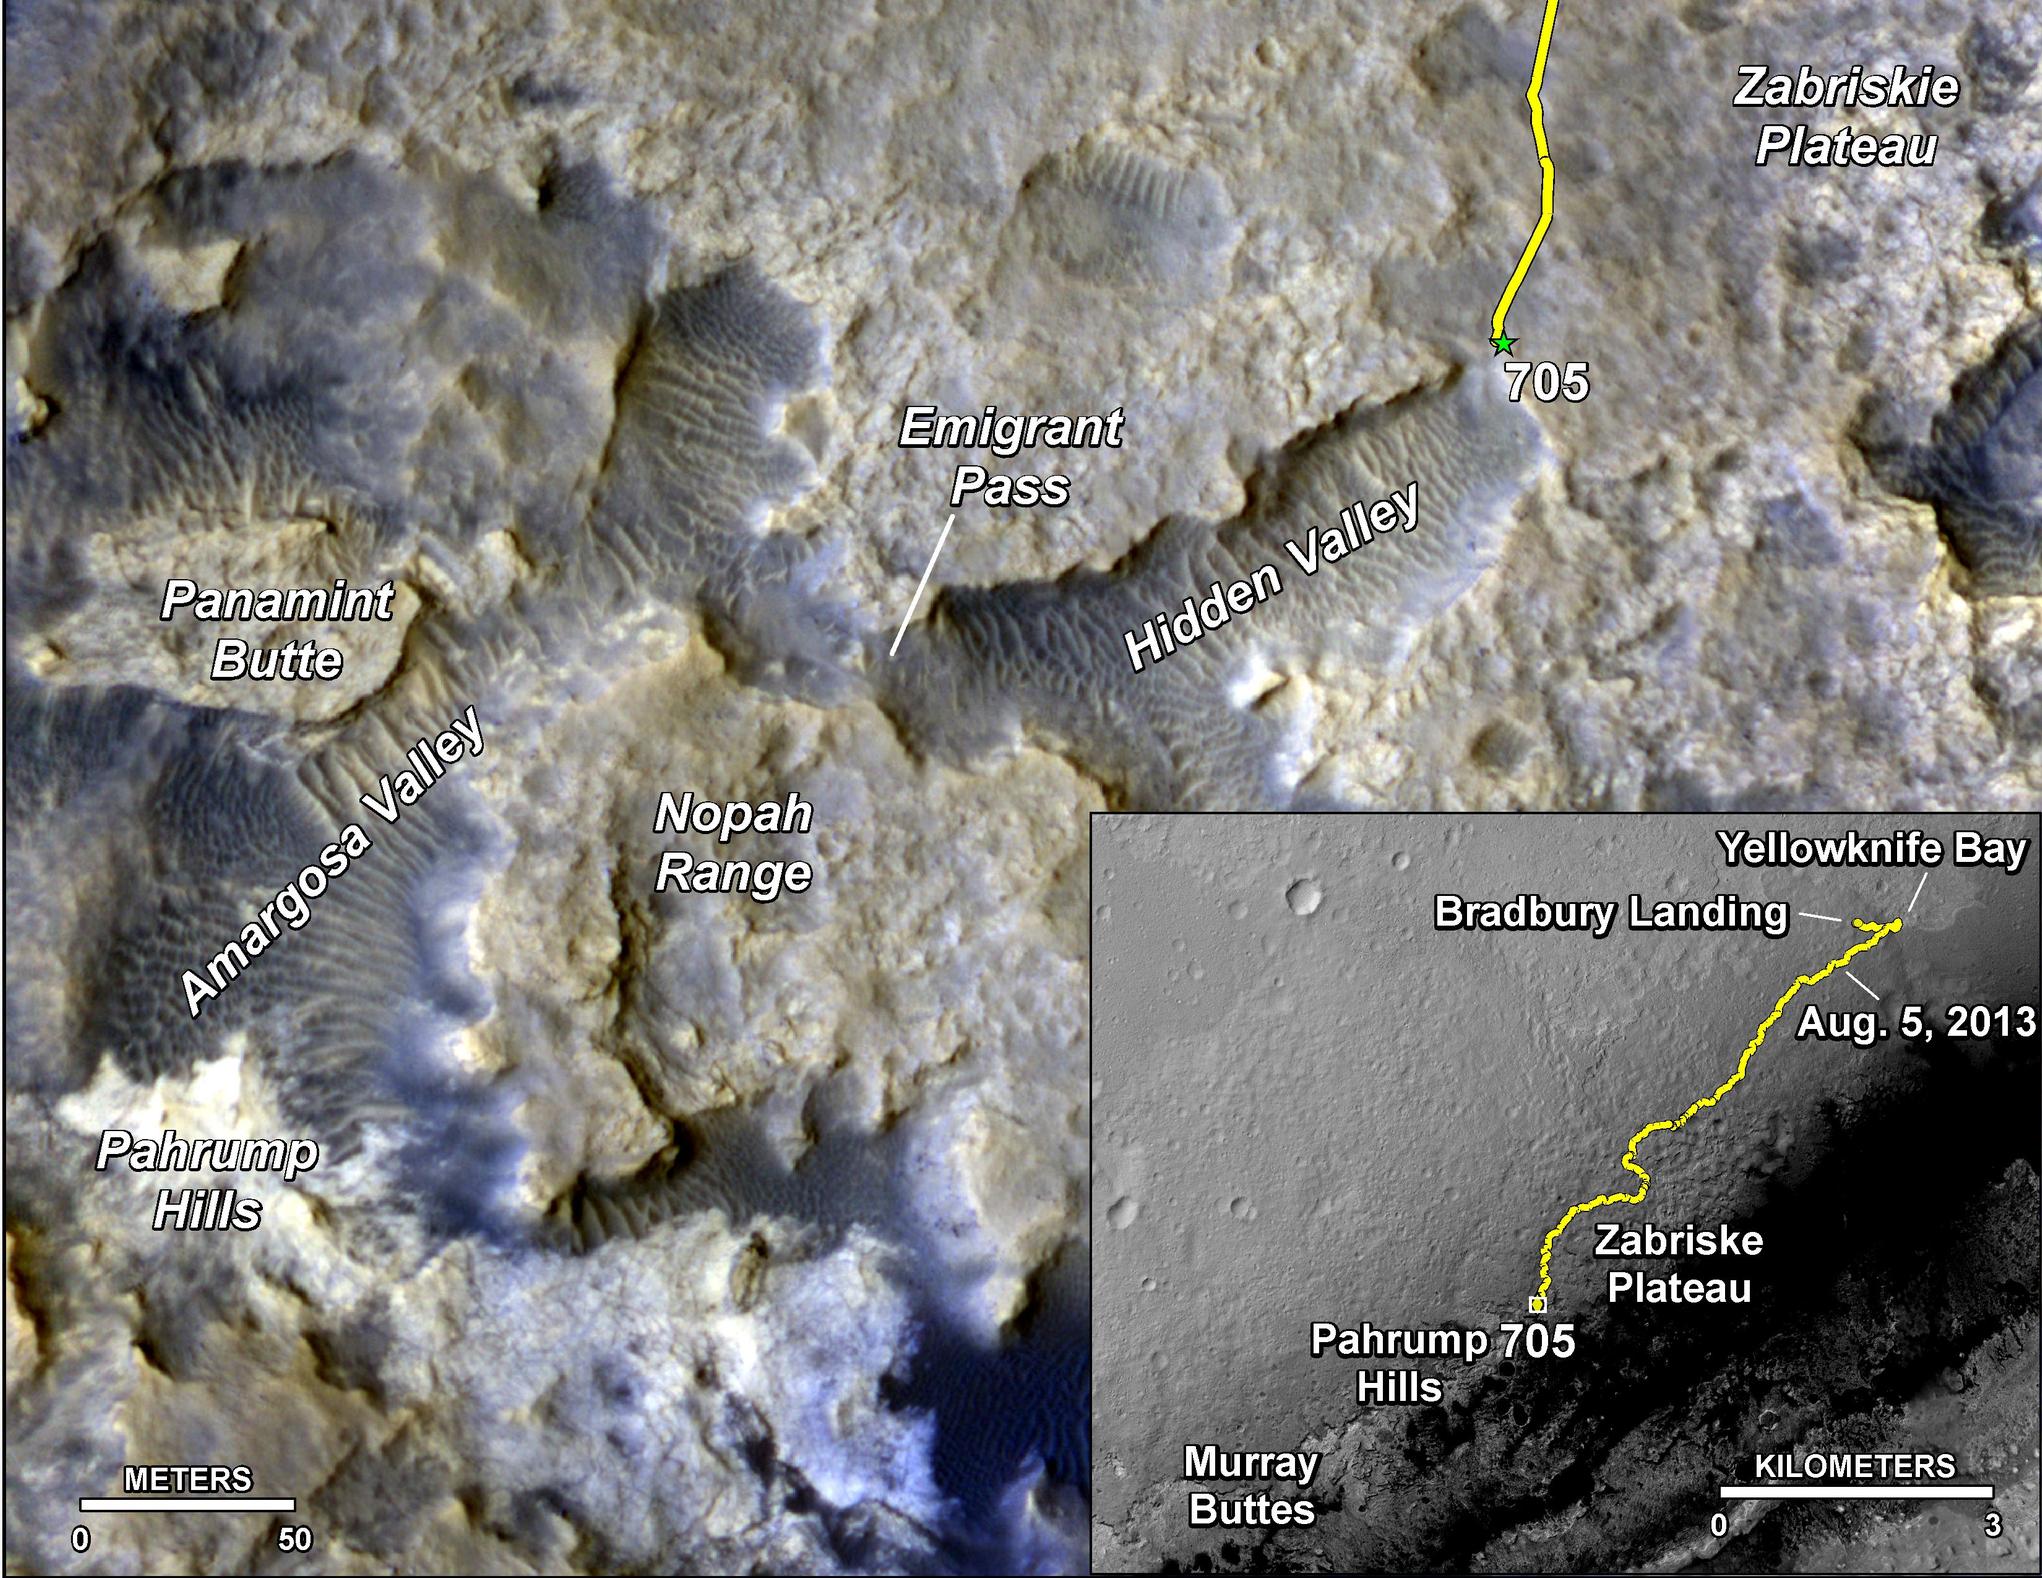 The main map here shows the assortment of landforms near the location of NASA's Curiosity Mars rover as the rover's second anniversary of landing on Mars nears.